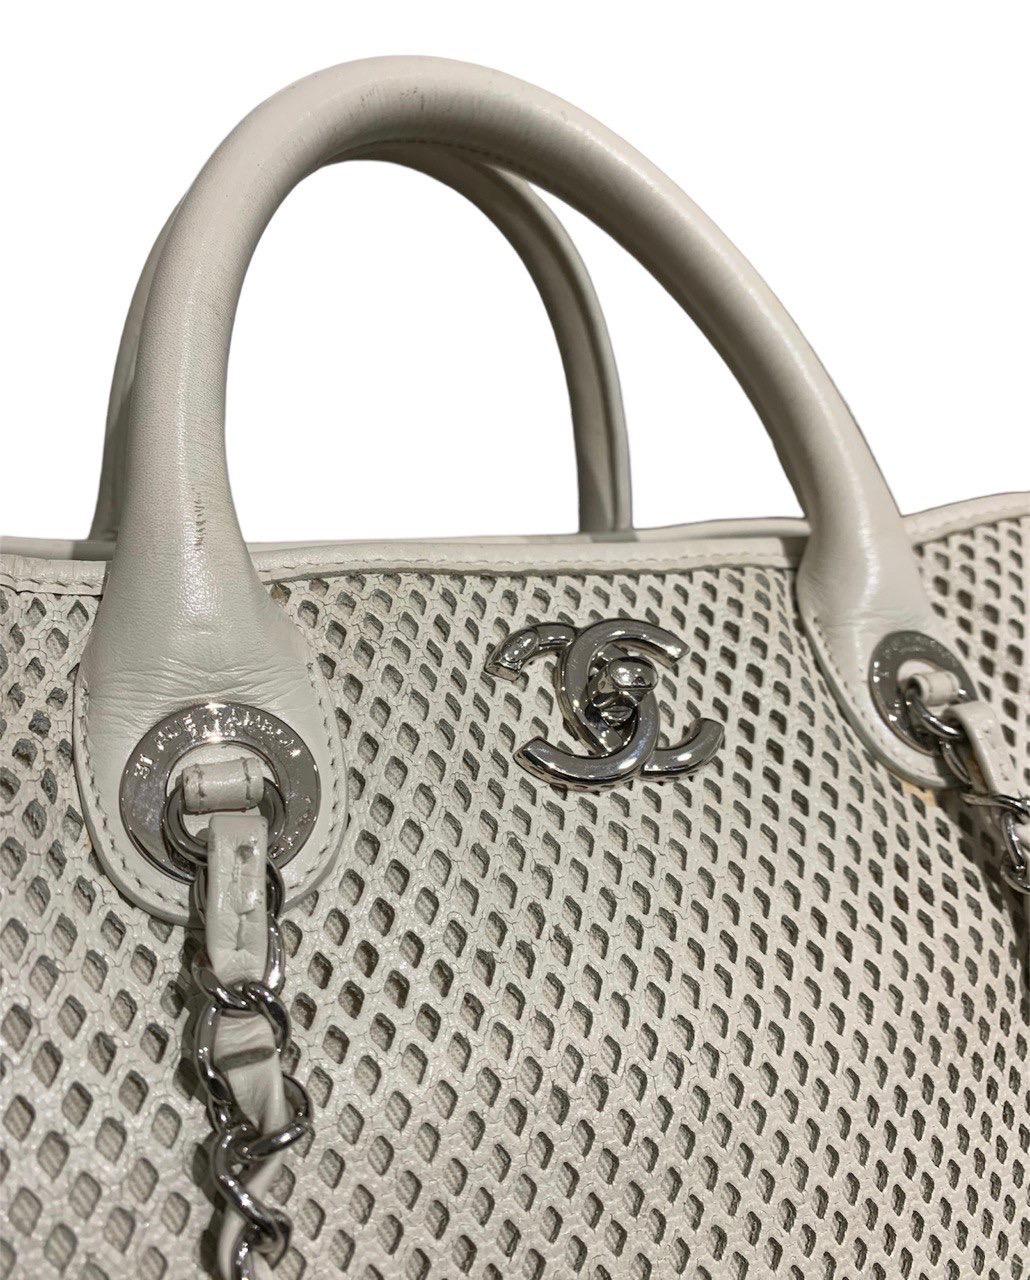 Women's Chanel White Perforated Leather Shopper Deauville Bag